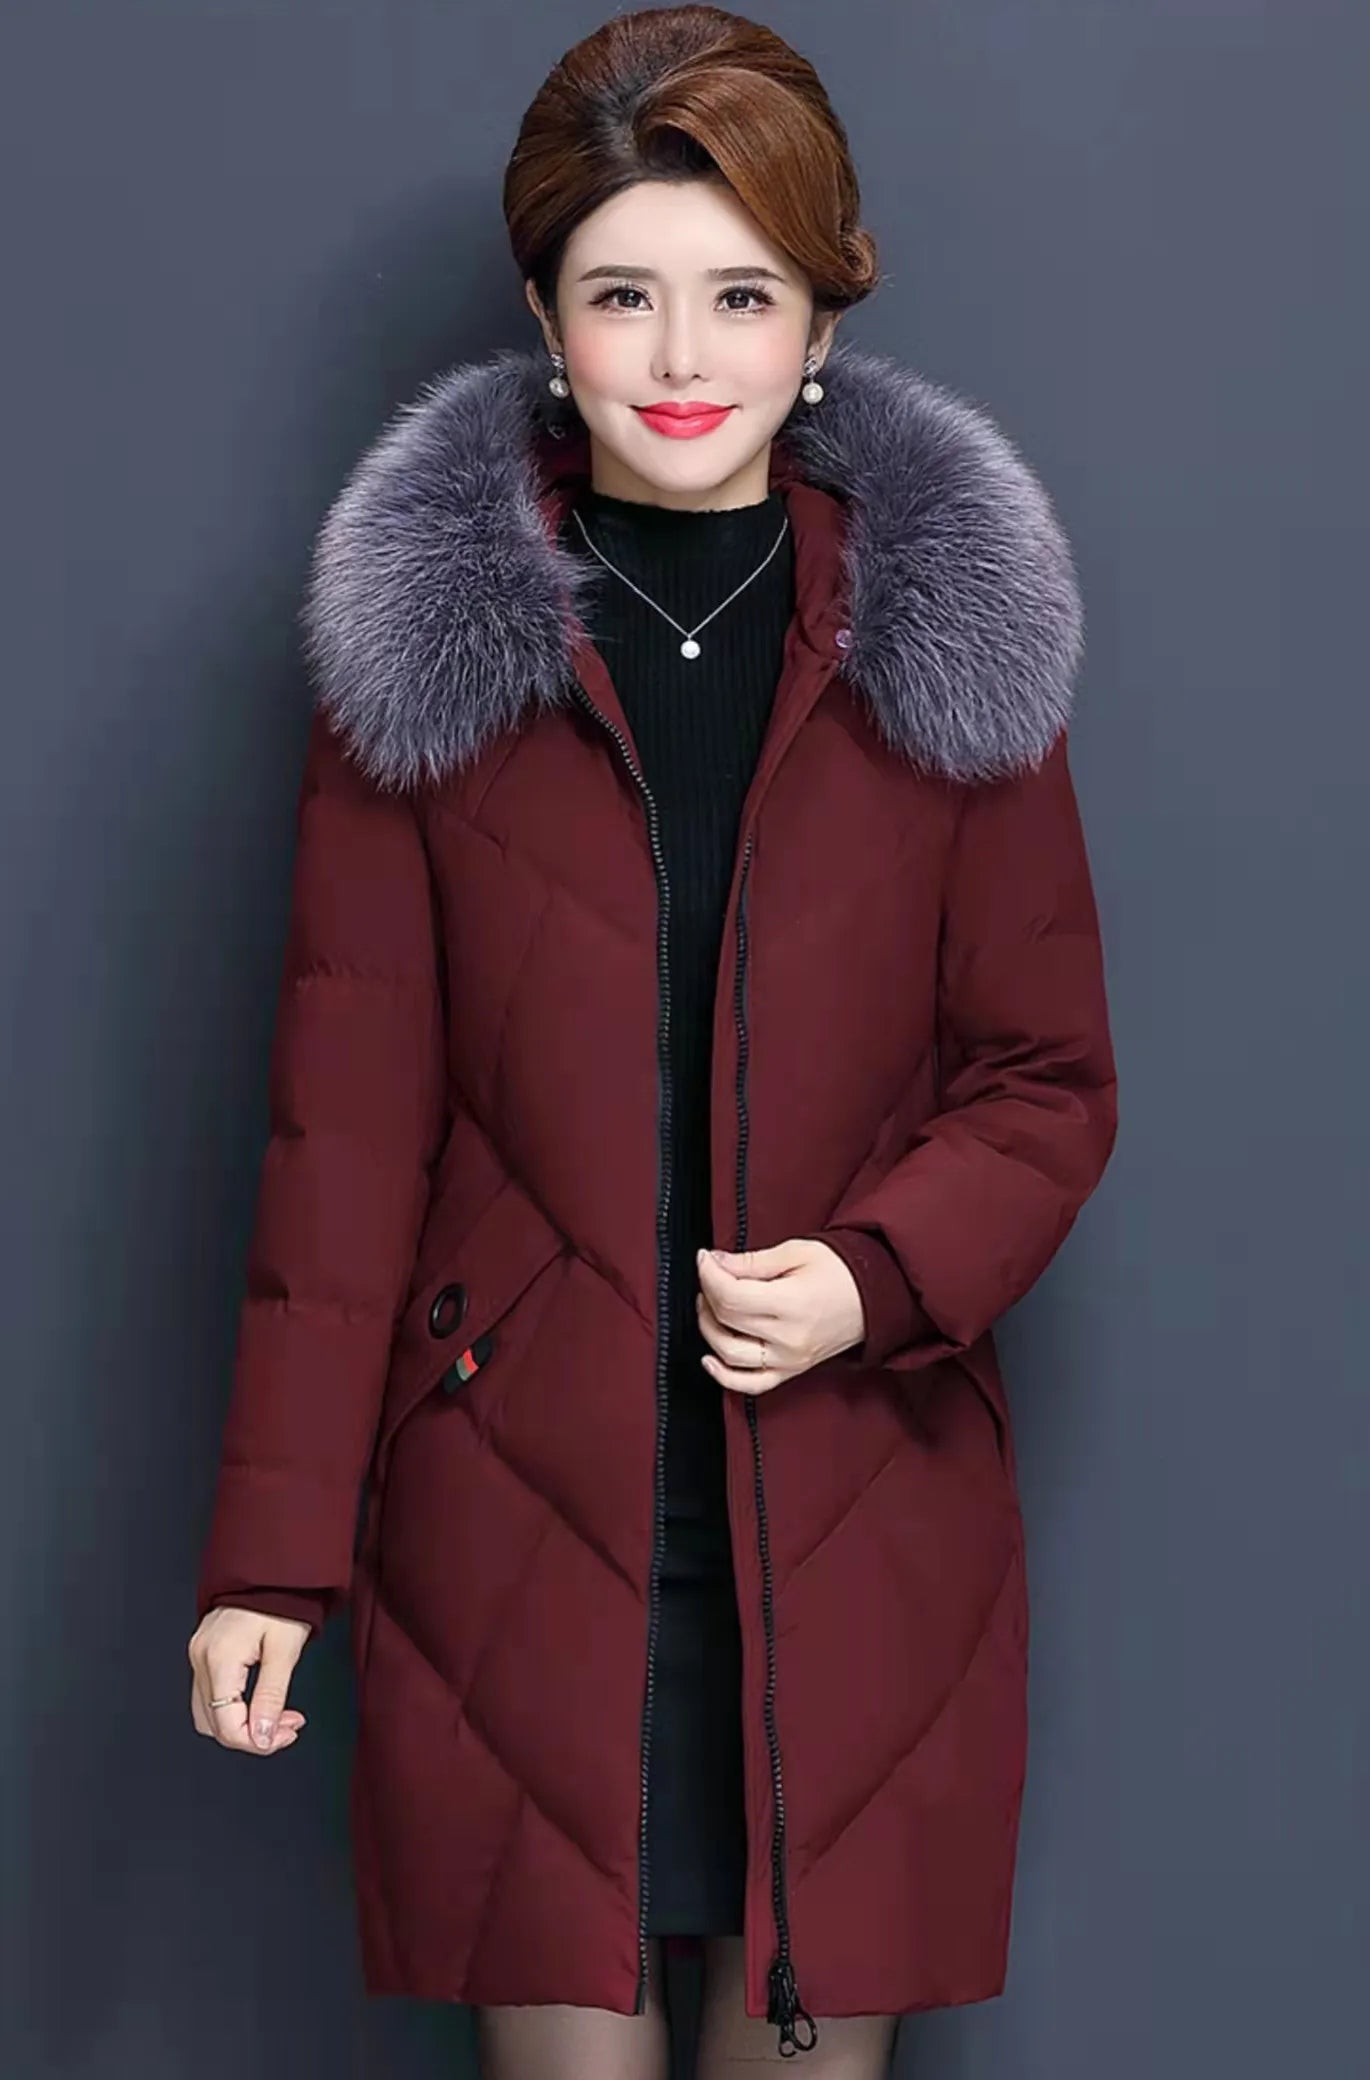 Down Cotton Clothes Jacket Big Fur Collar Solid Color Large Size Loose Winter Coat Hooded Manteau